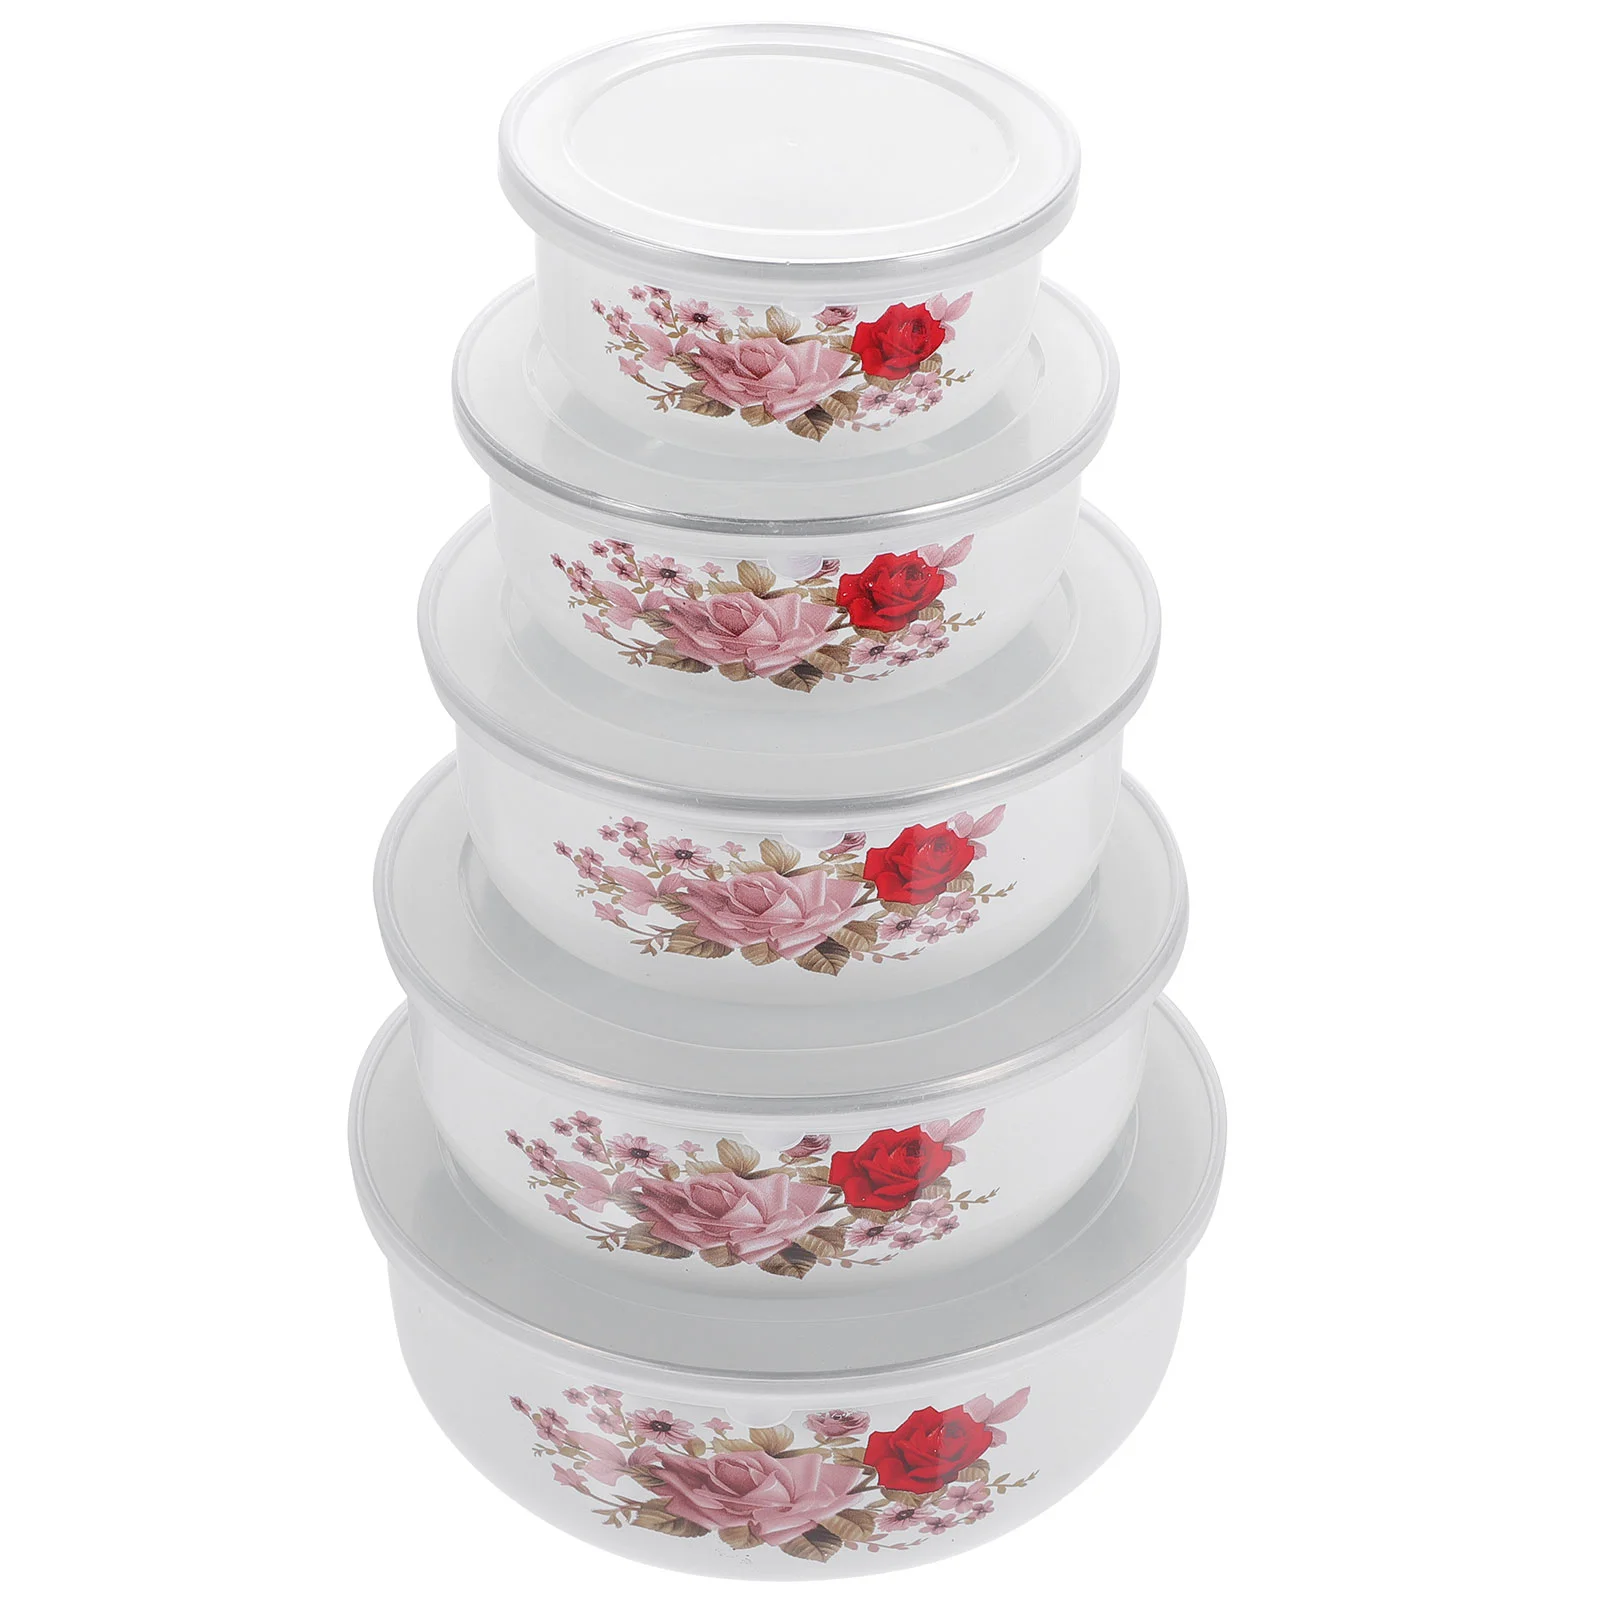 

5 Pcs Enamel Covered Bowl Salad Bowls Lids Kitchen Food Seasoning Soup Serving Mixing Deepen Baby Enamelware Products